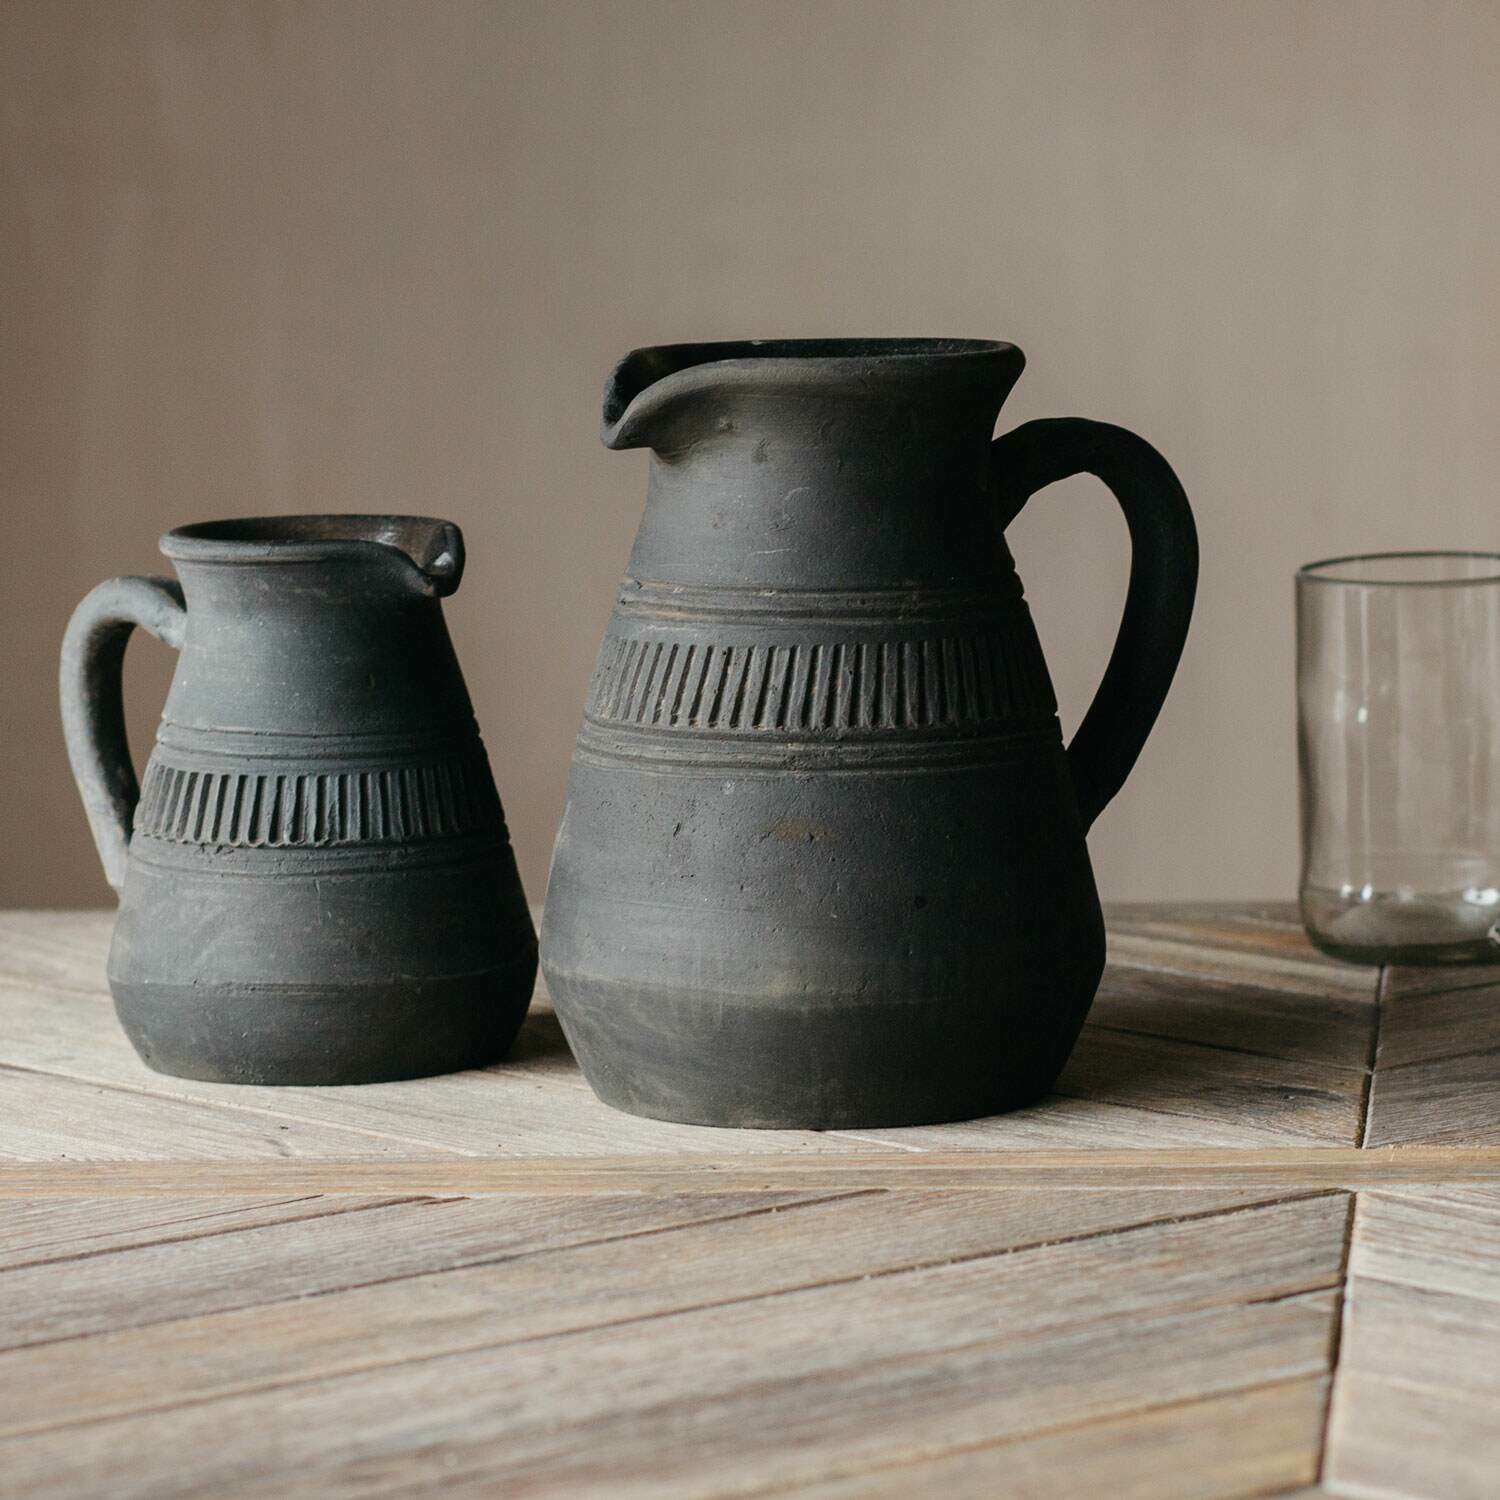 Read more about Graham and green small black terracotta jug vase